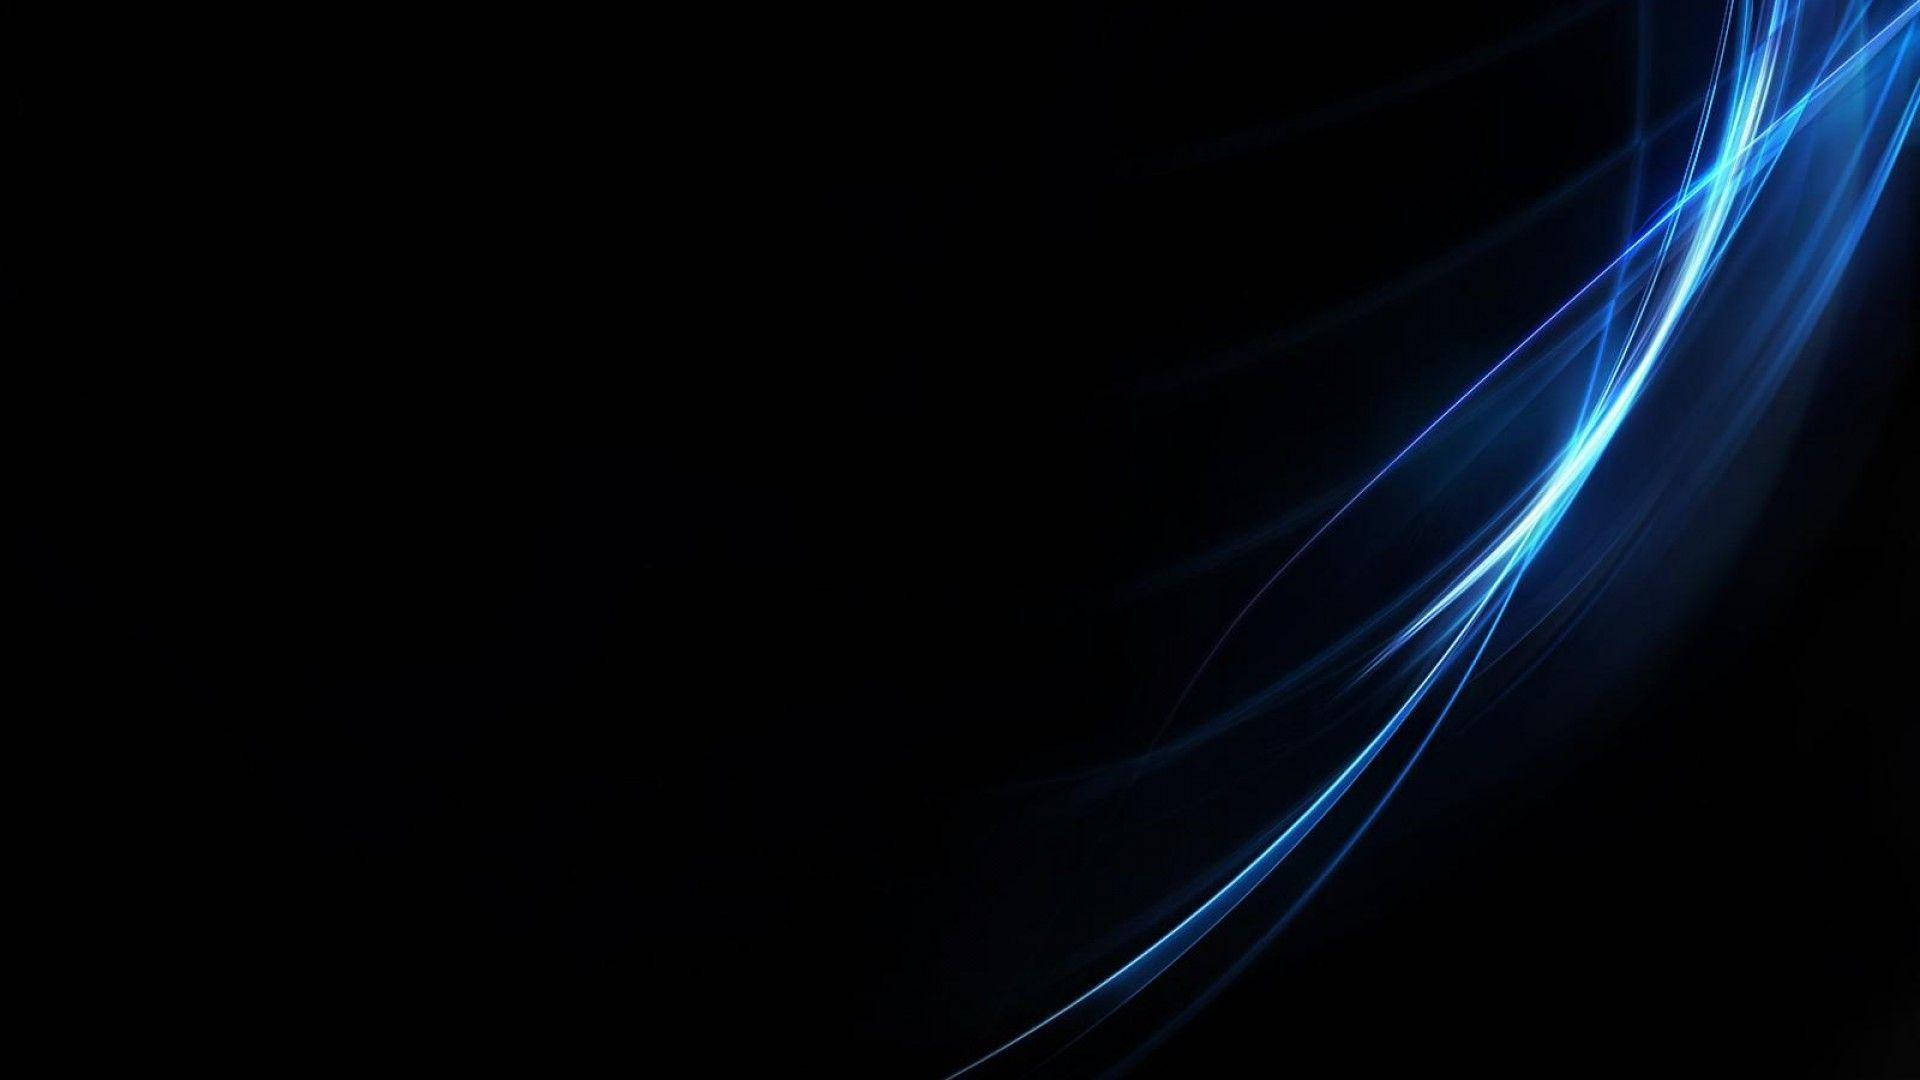 Pure Black And Neon Blue Streaks Background